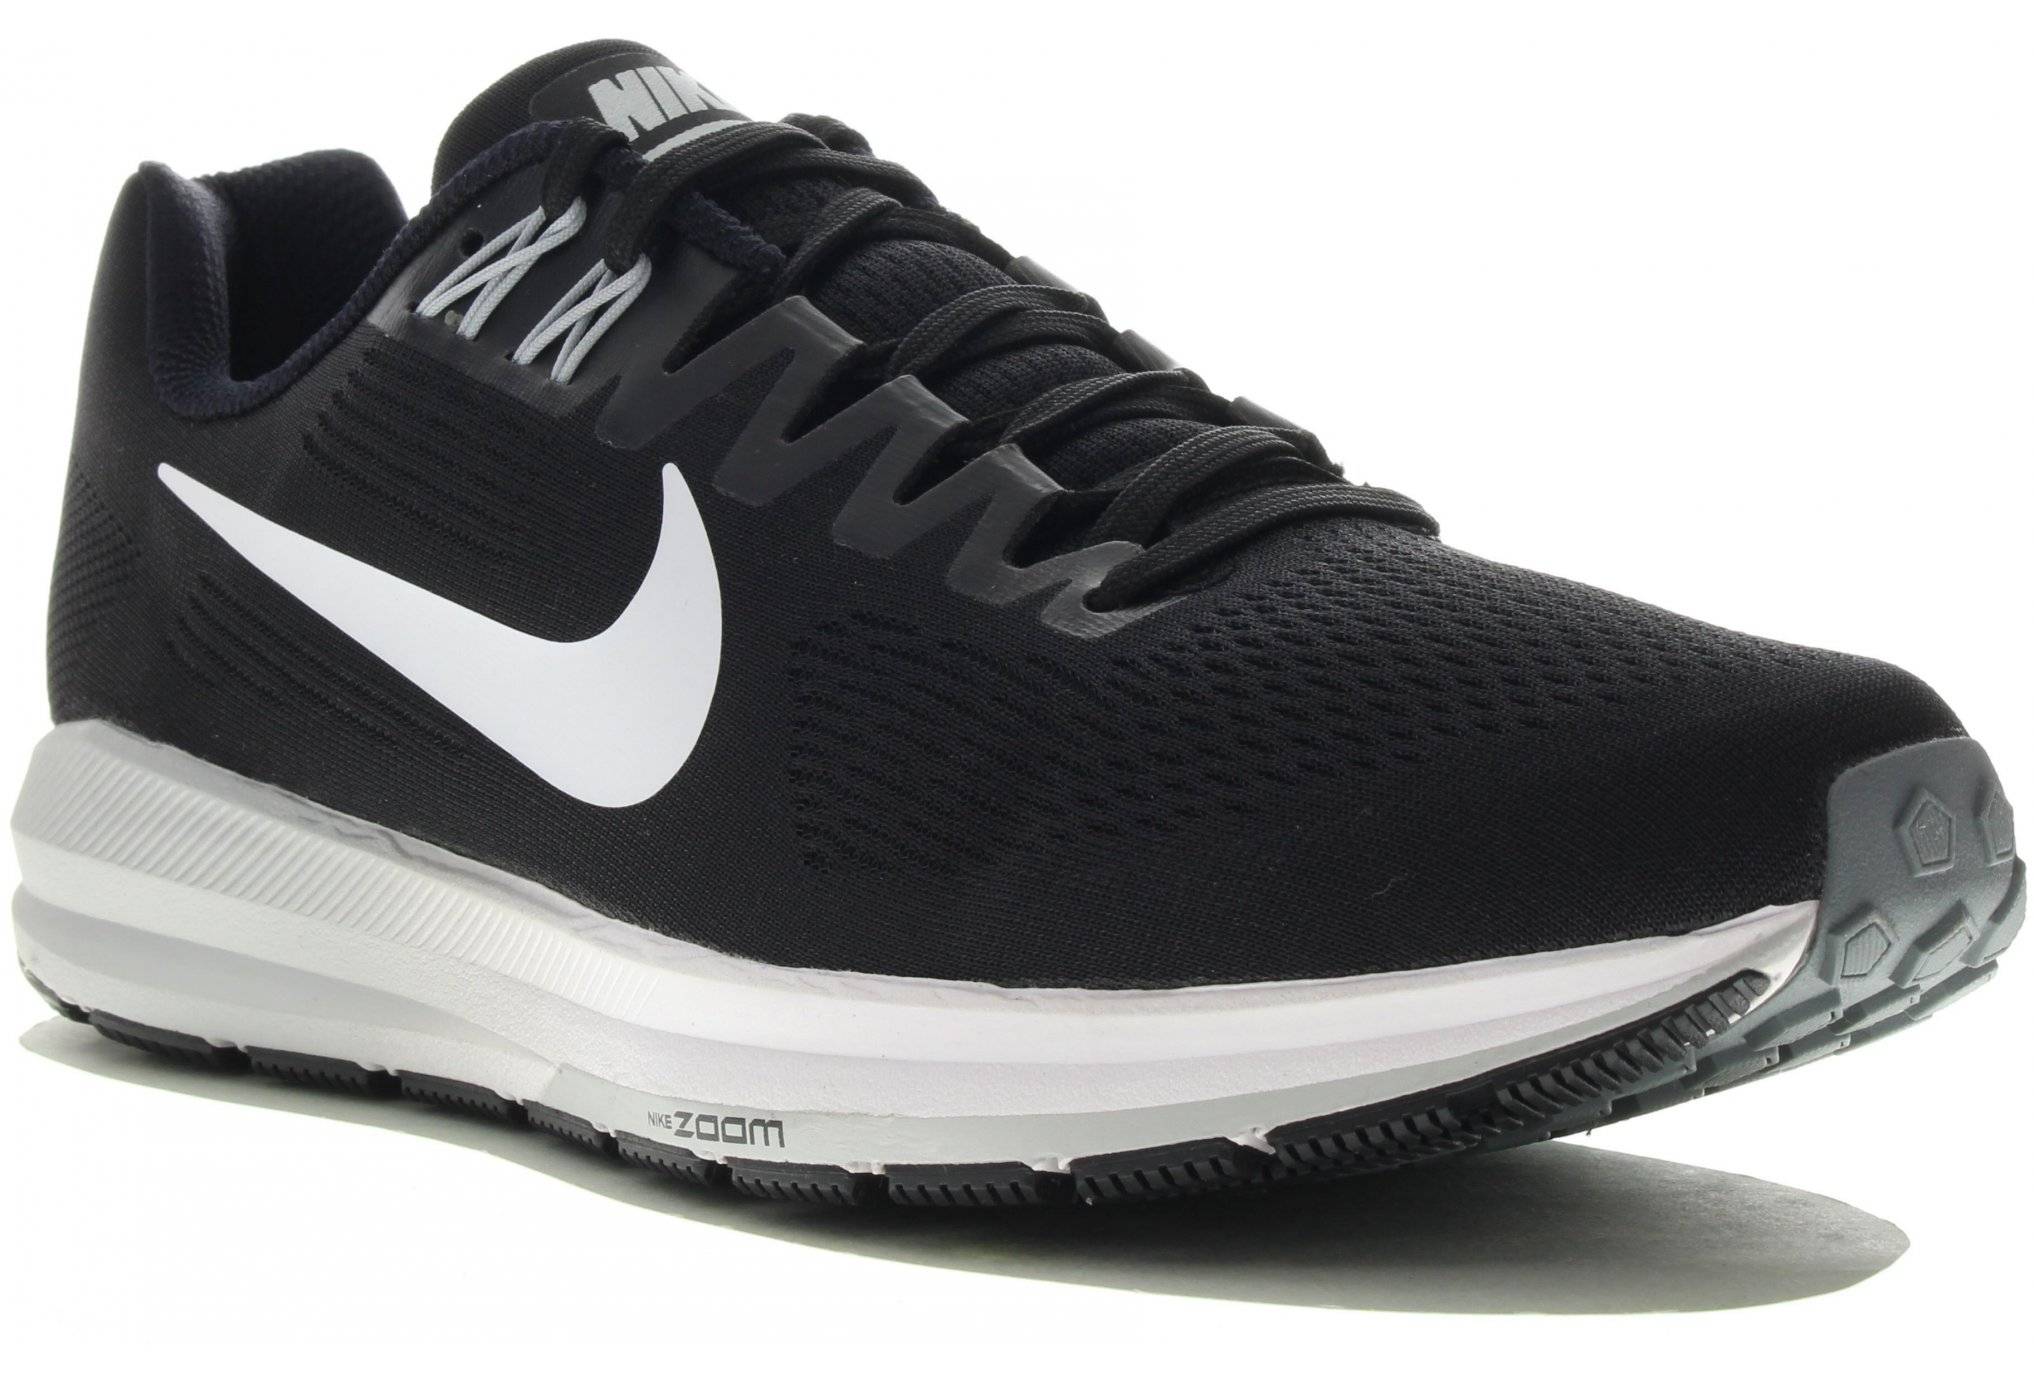 Nike Air Zoom Structure 21 M 